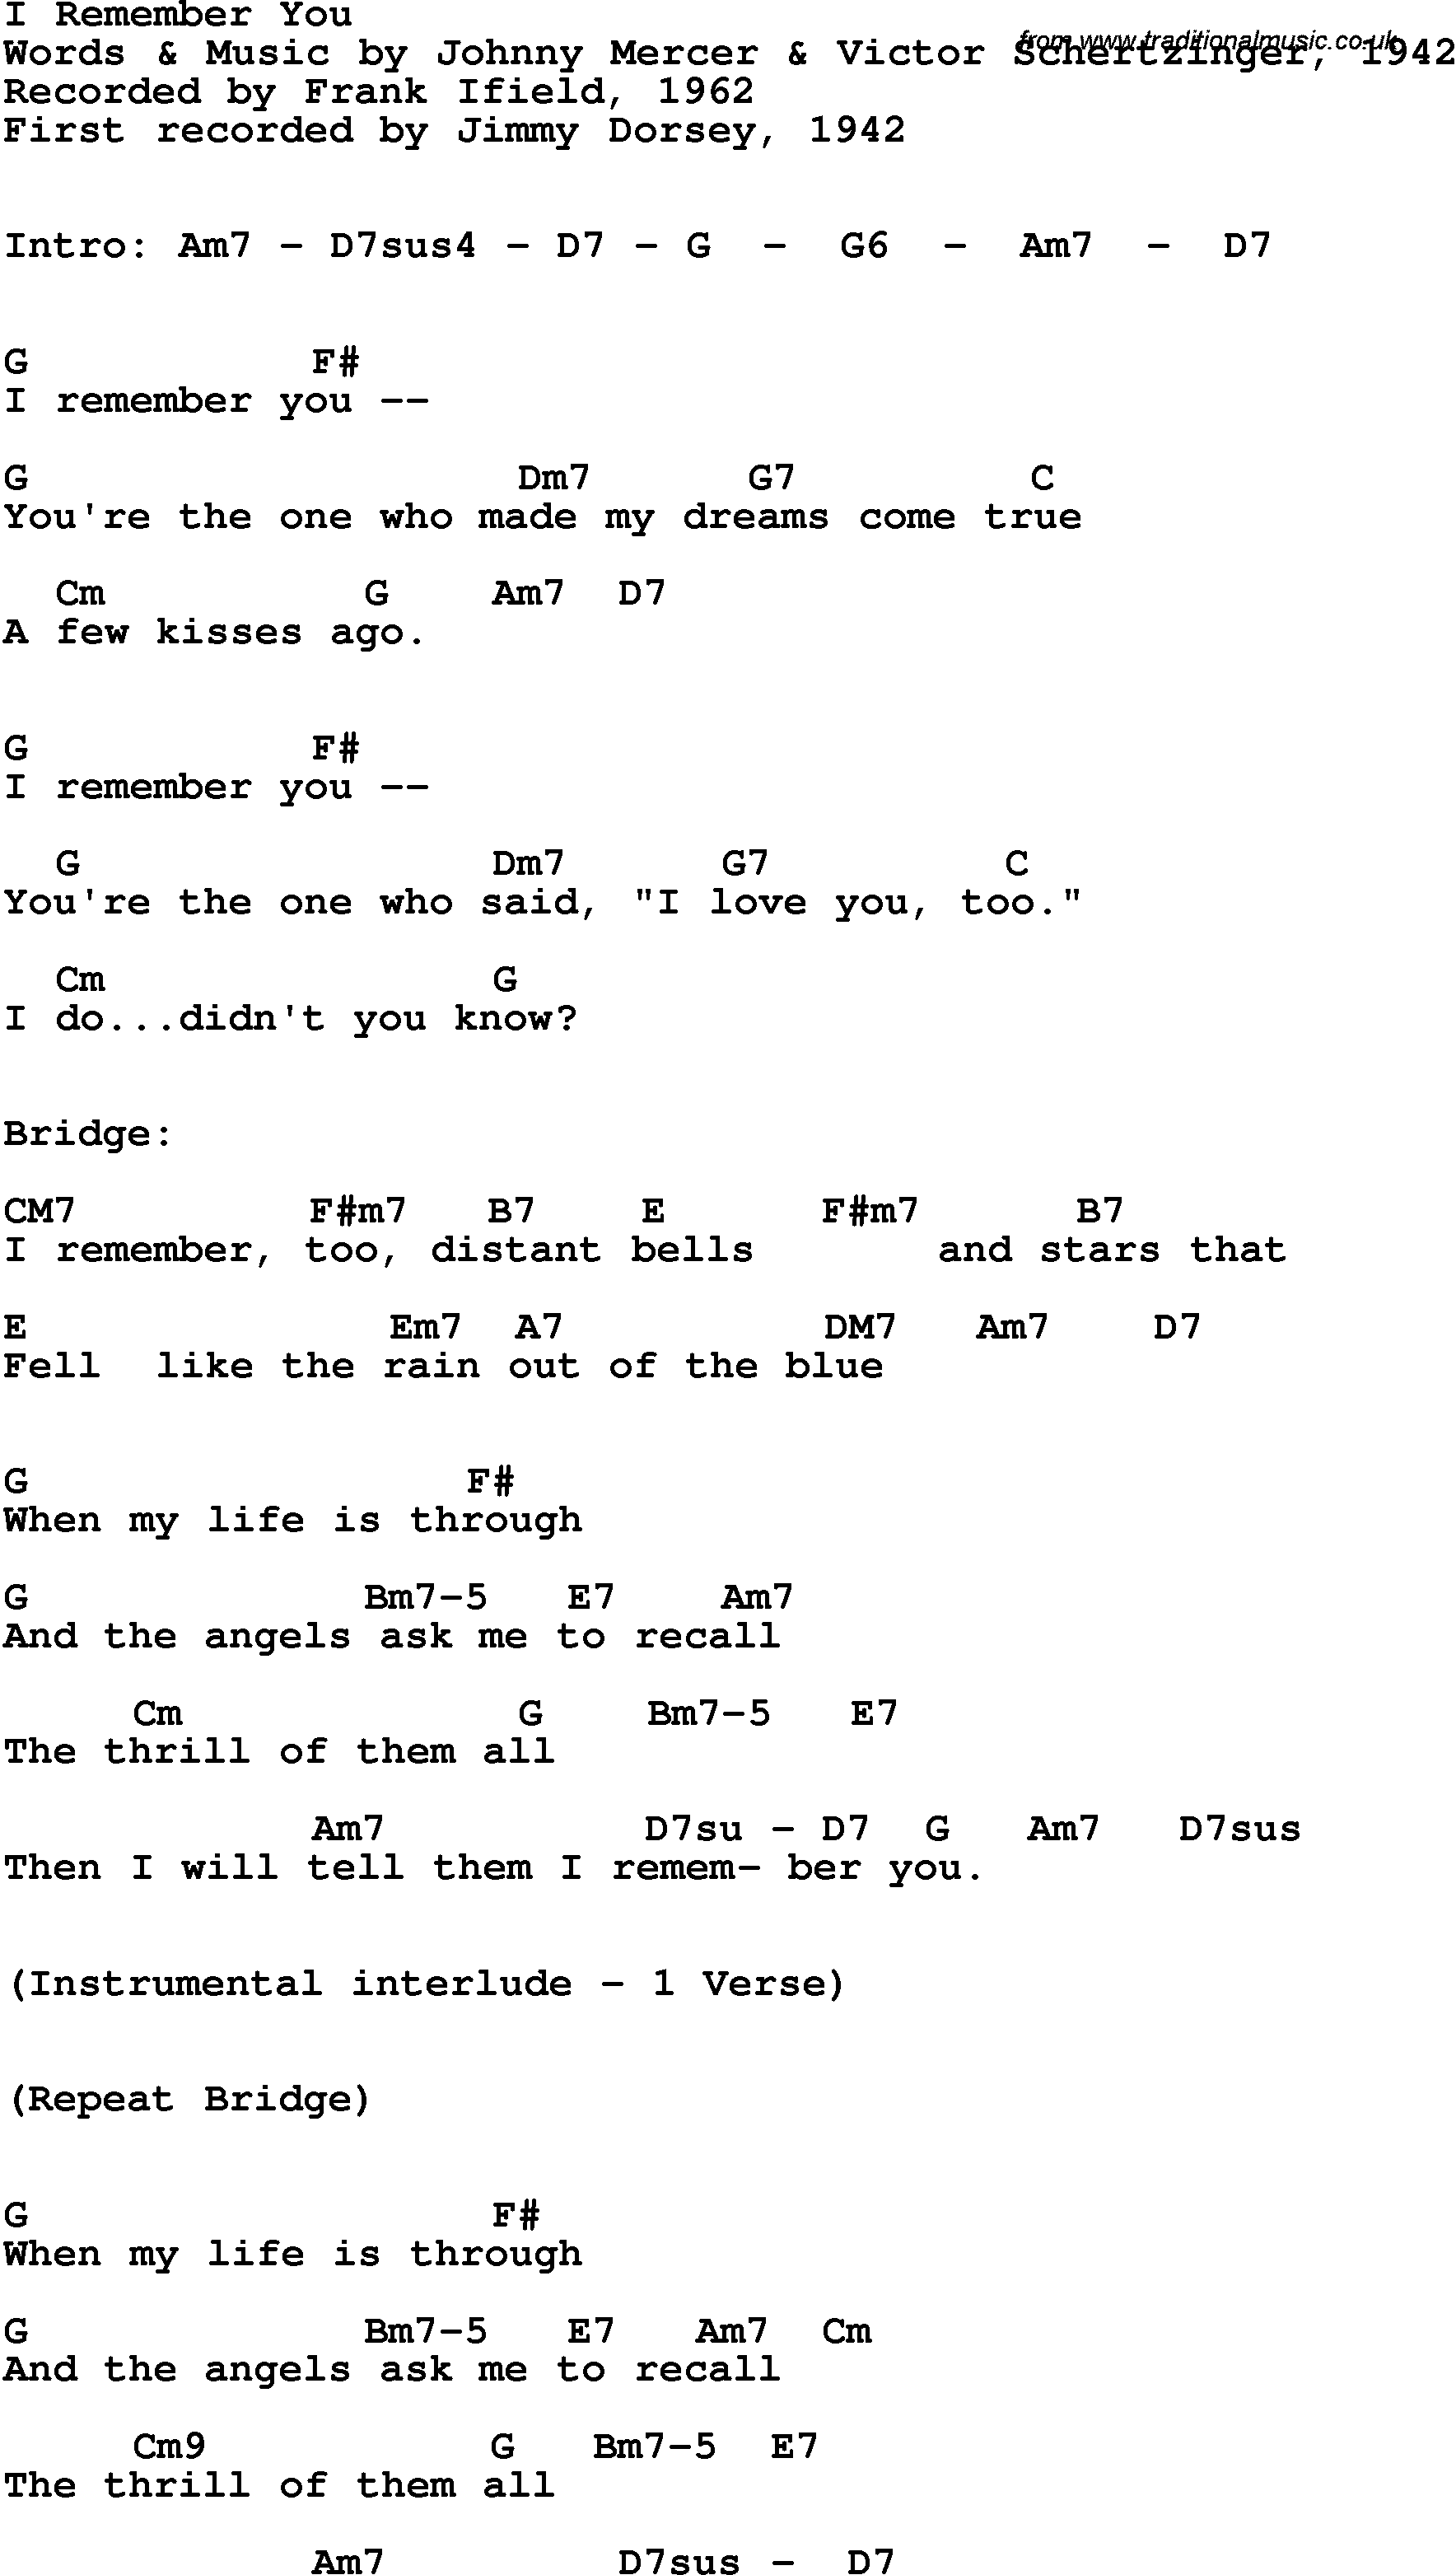 Song Lyrics with guitar chords for I Remember You - Frank Ifield, 1962